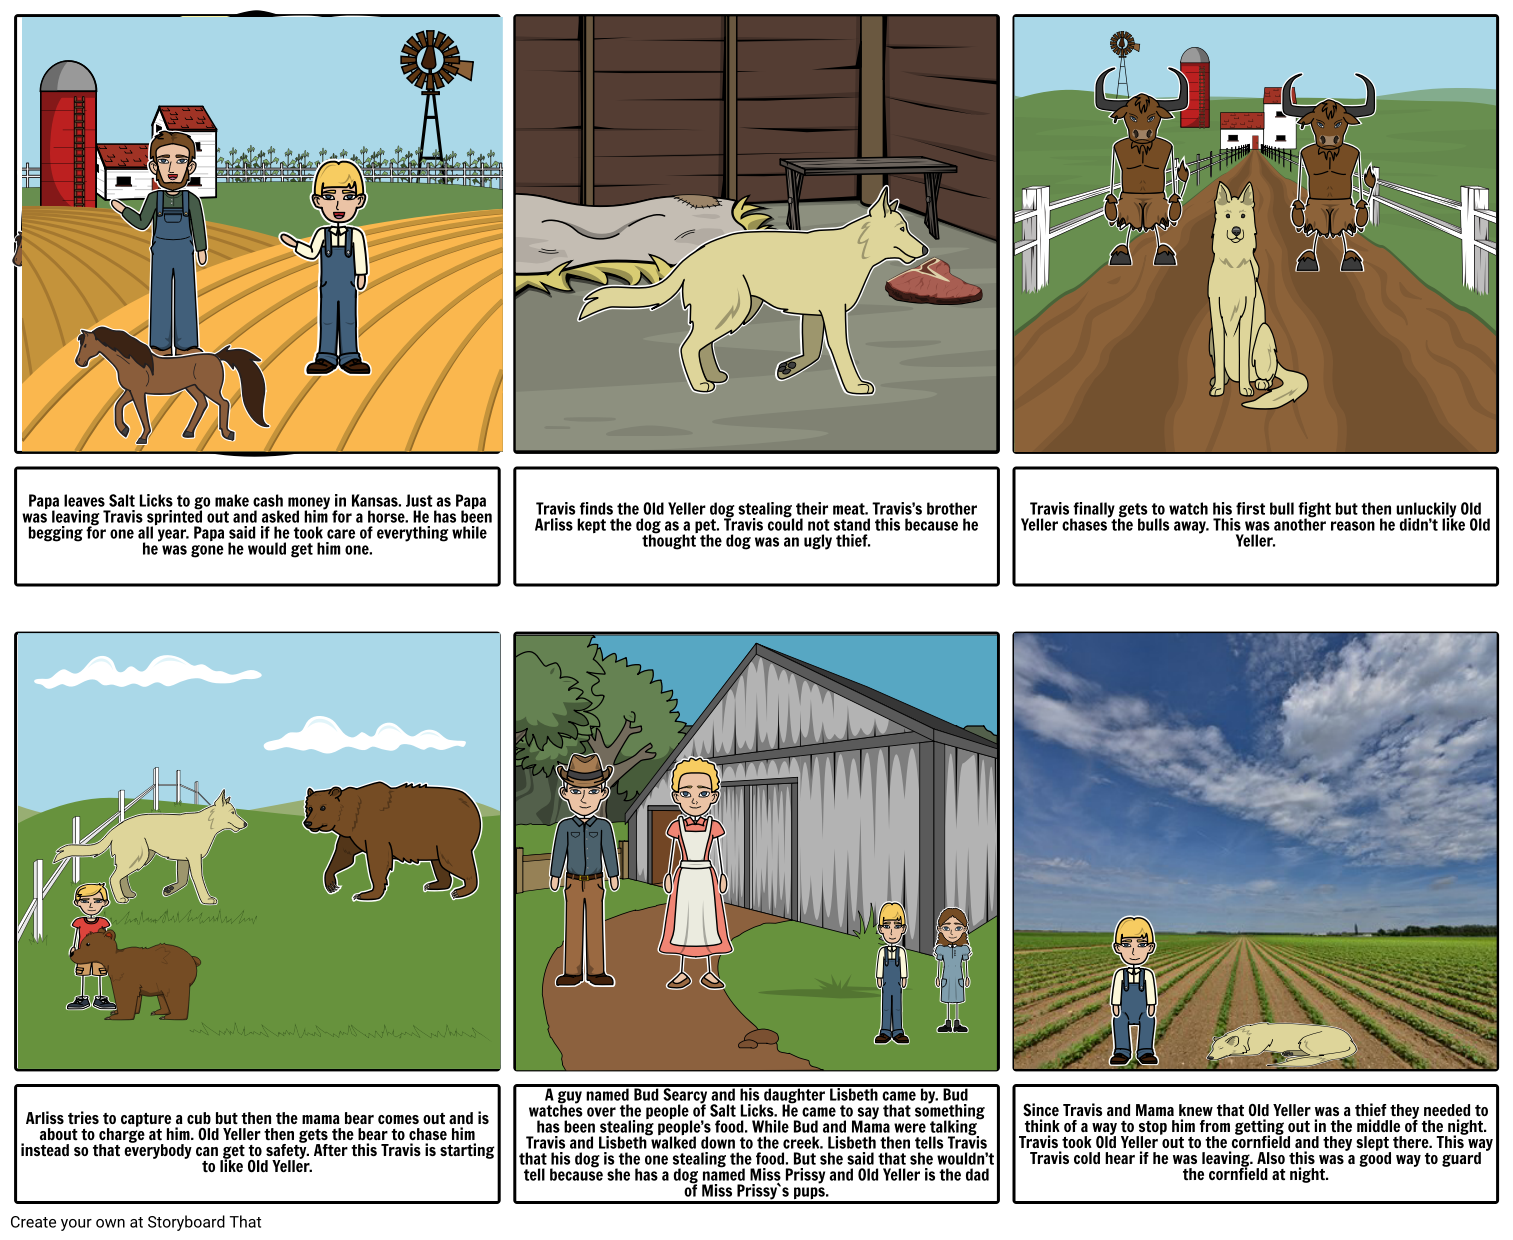 old-yeller-by-fred-gipson-storyboard-by-owentat